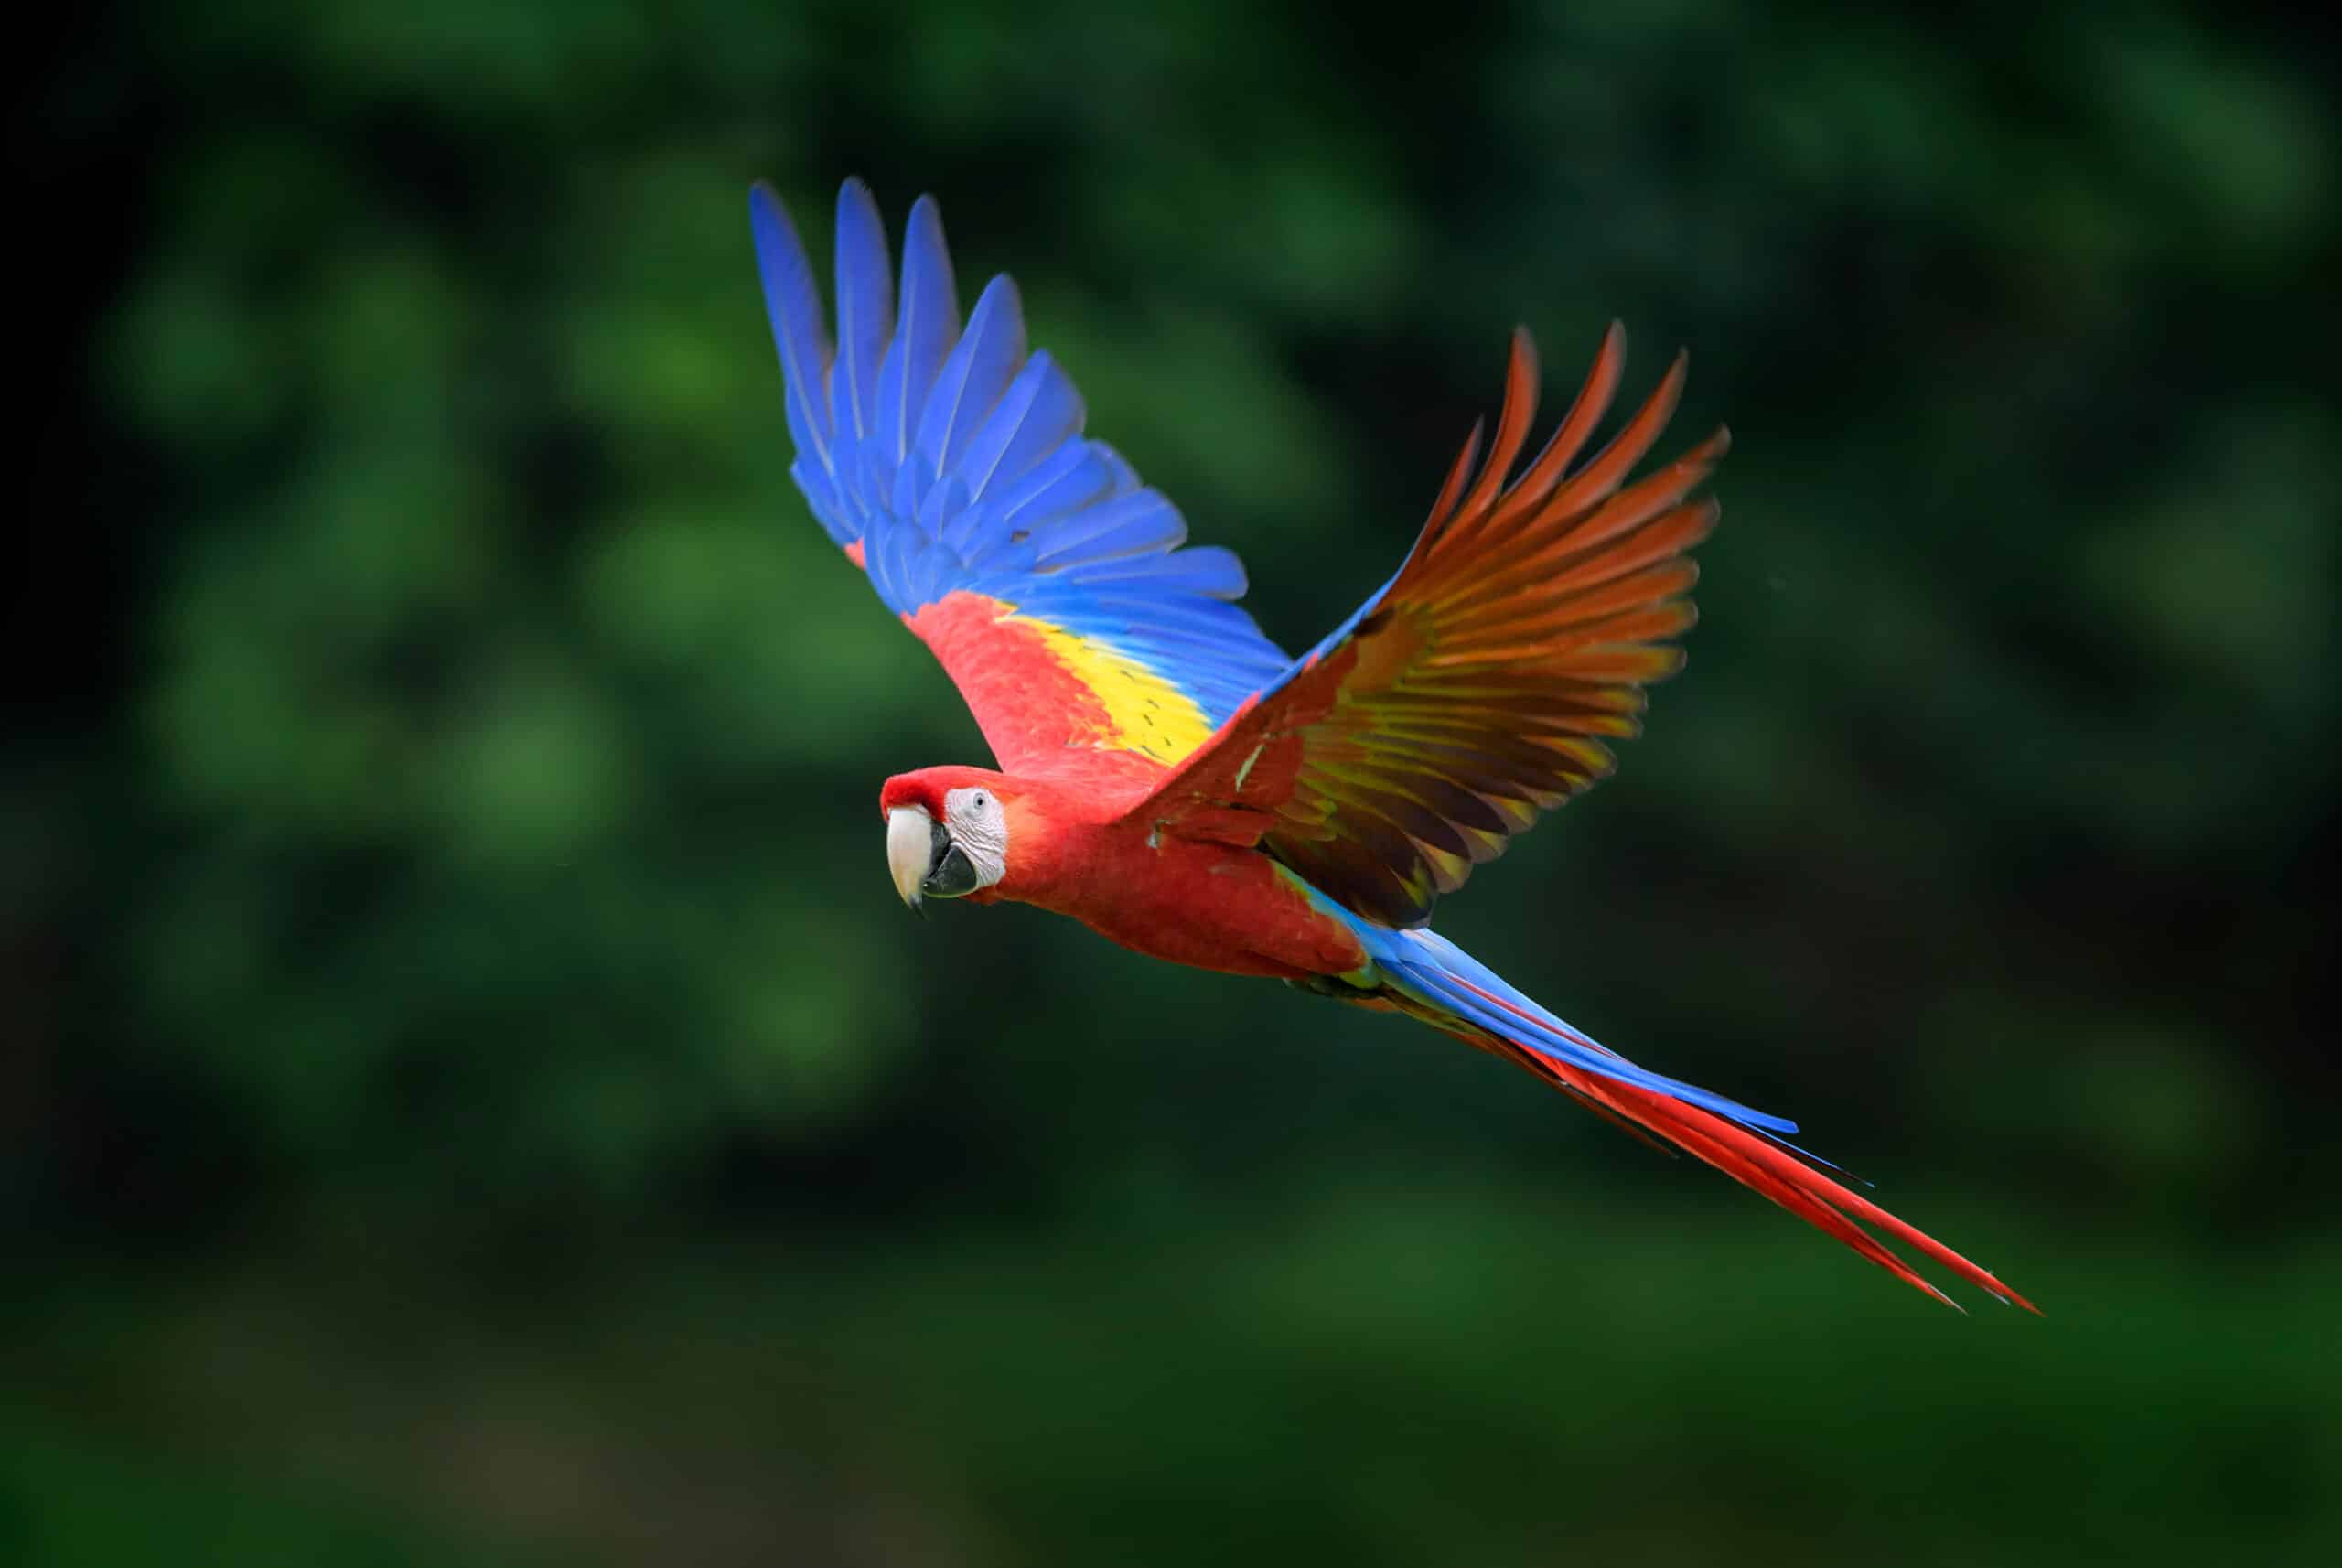 Parrots are some of the longest-living creatures on earth